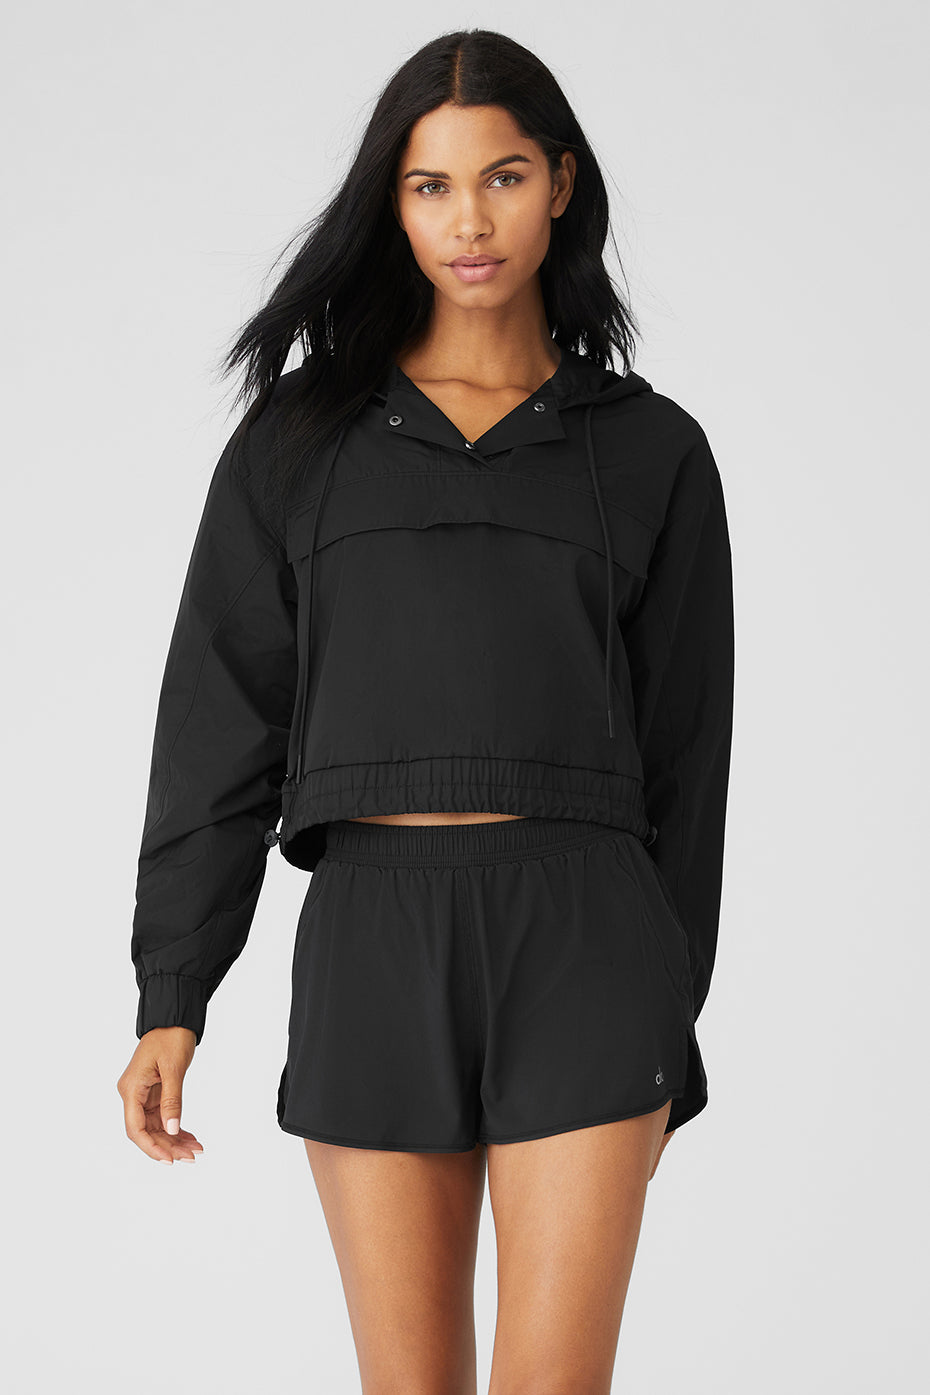 Alo Yoga Accolade Hoodie - $80 - From Izzy